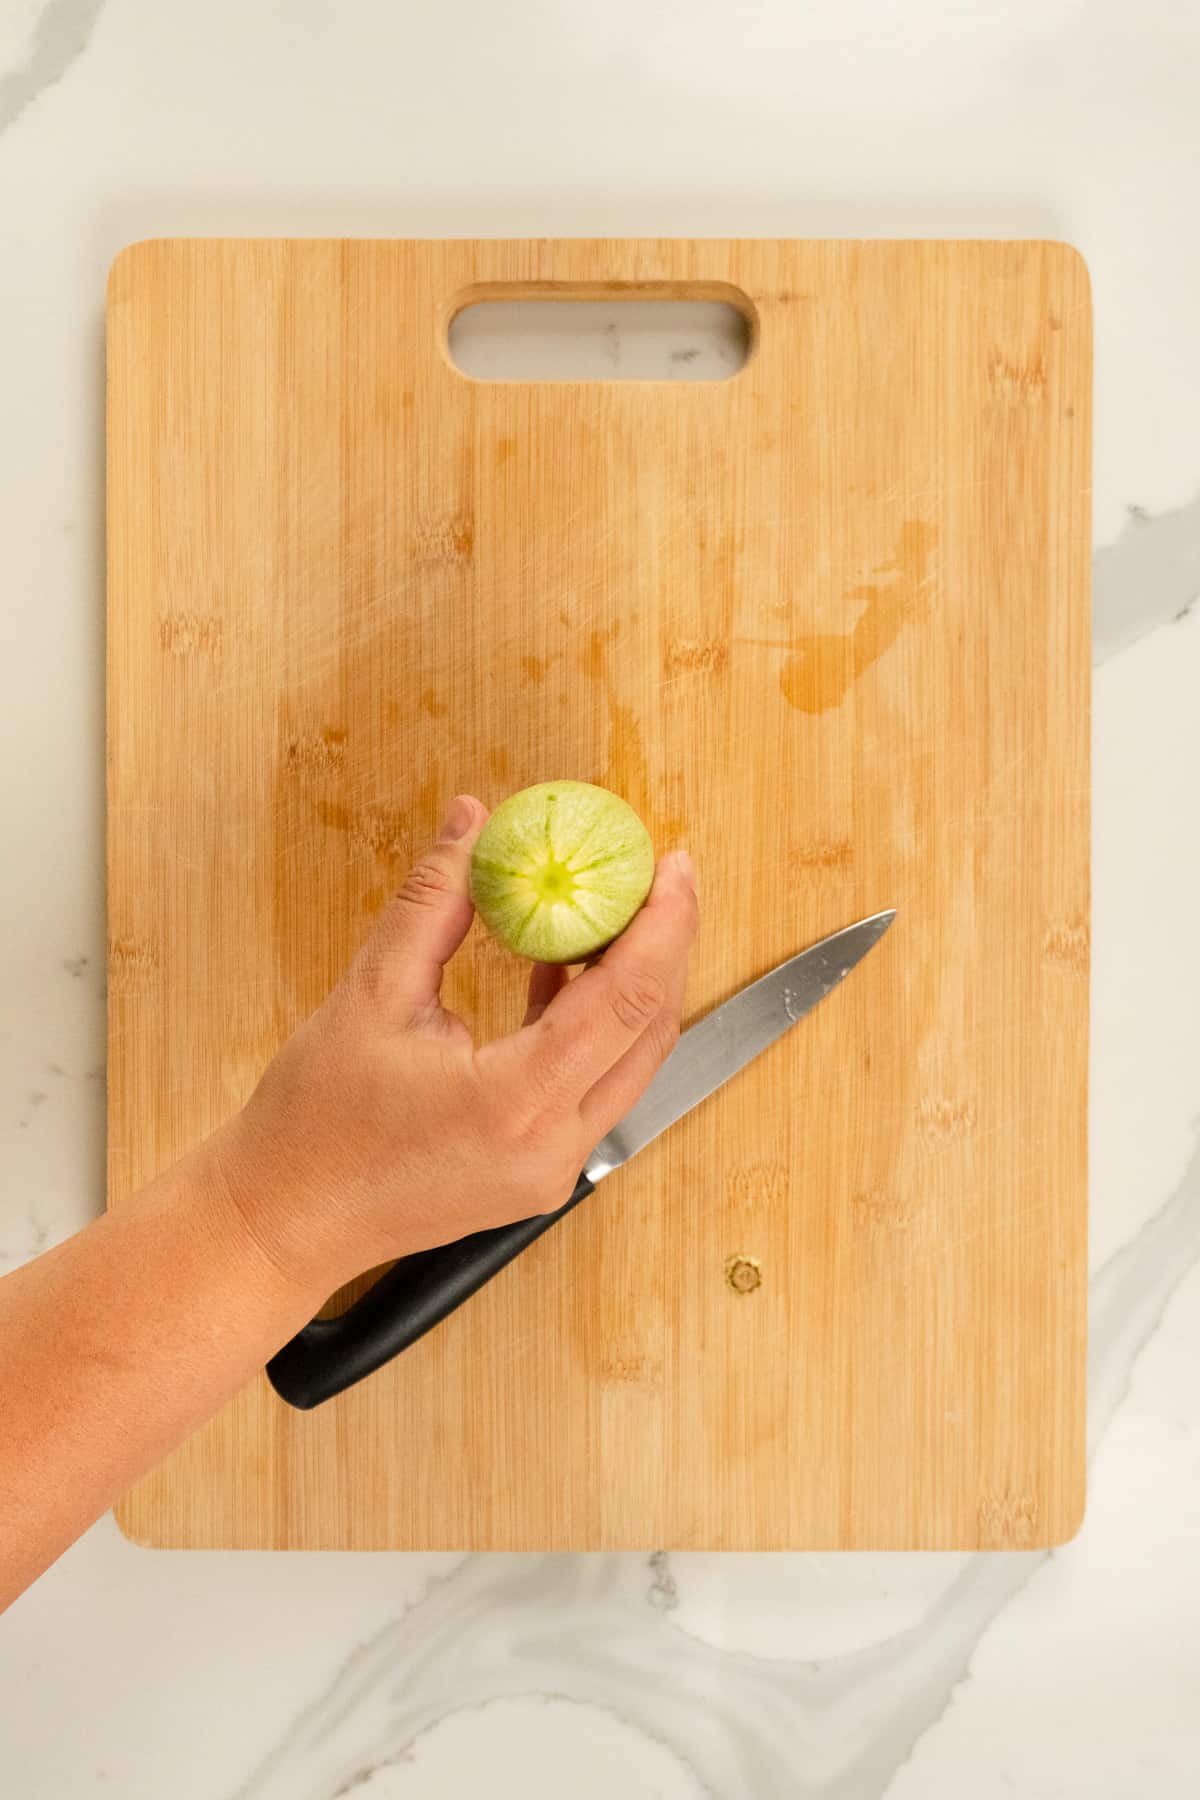 a hand holding a trimmed zucchini bottom on a chopping board and knife